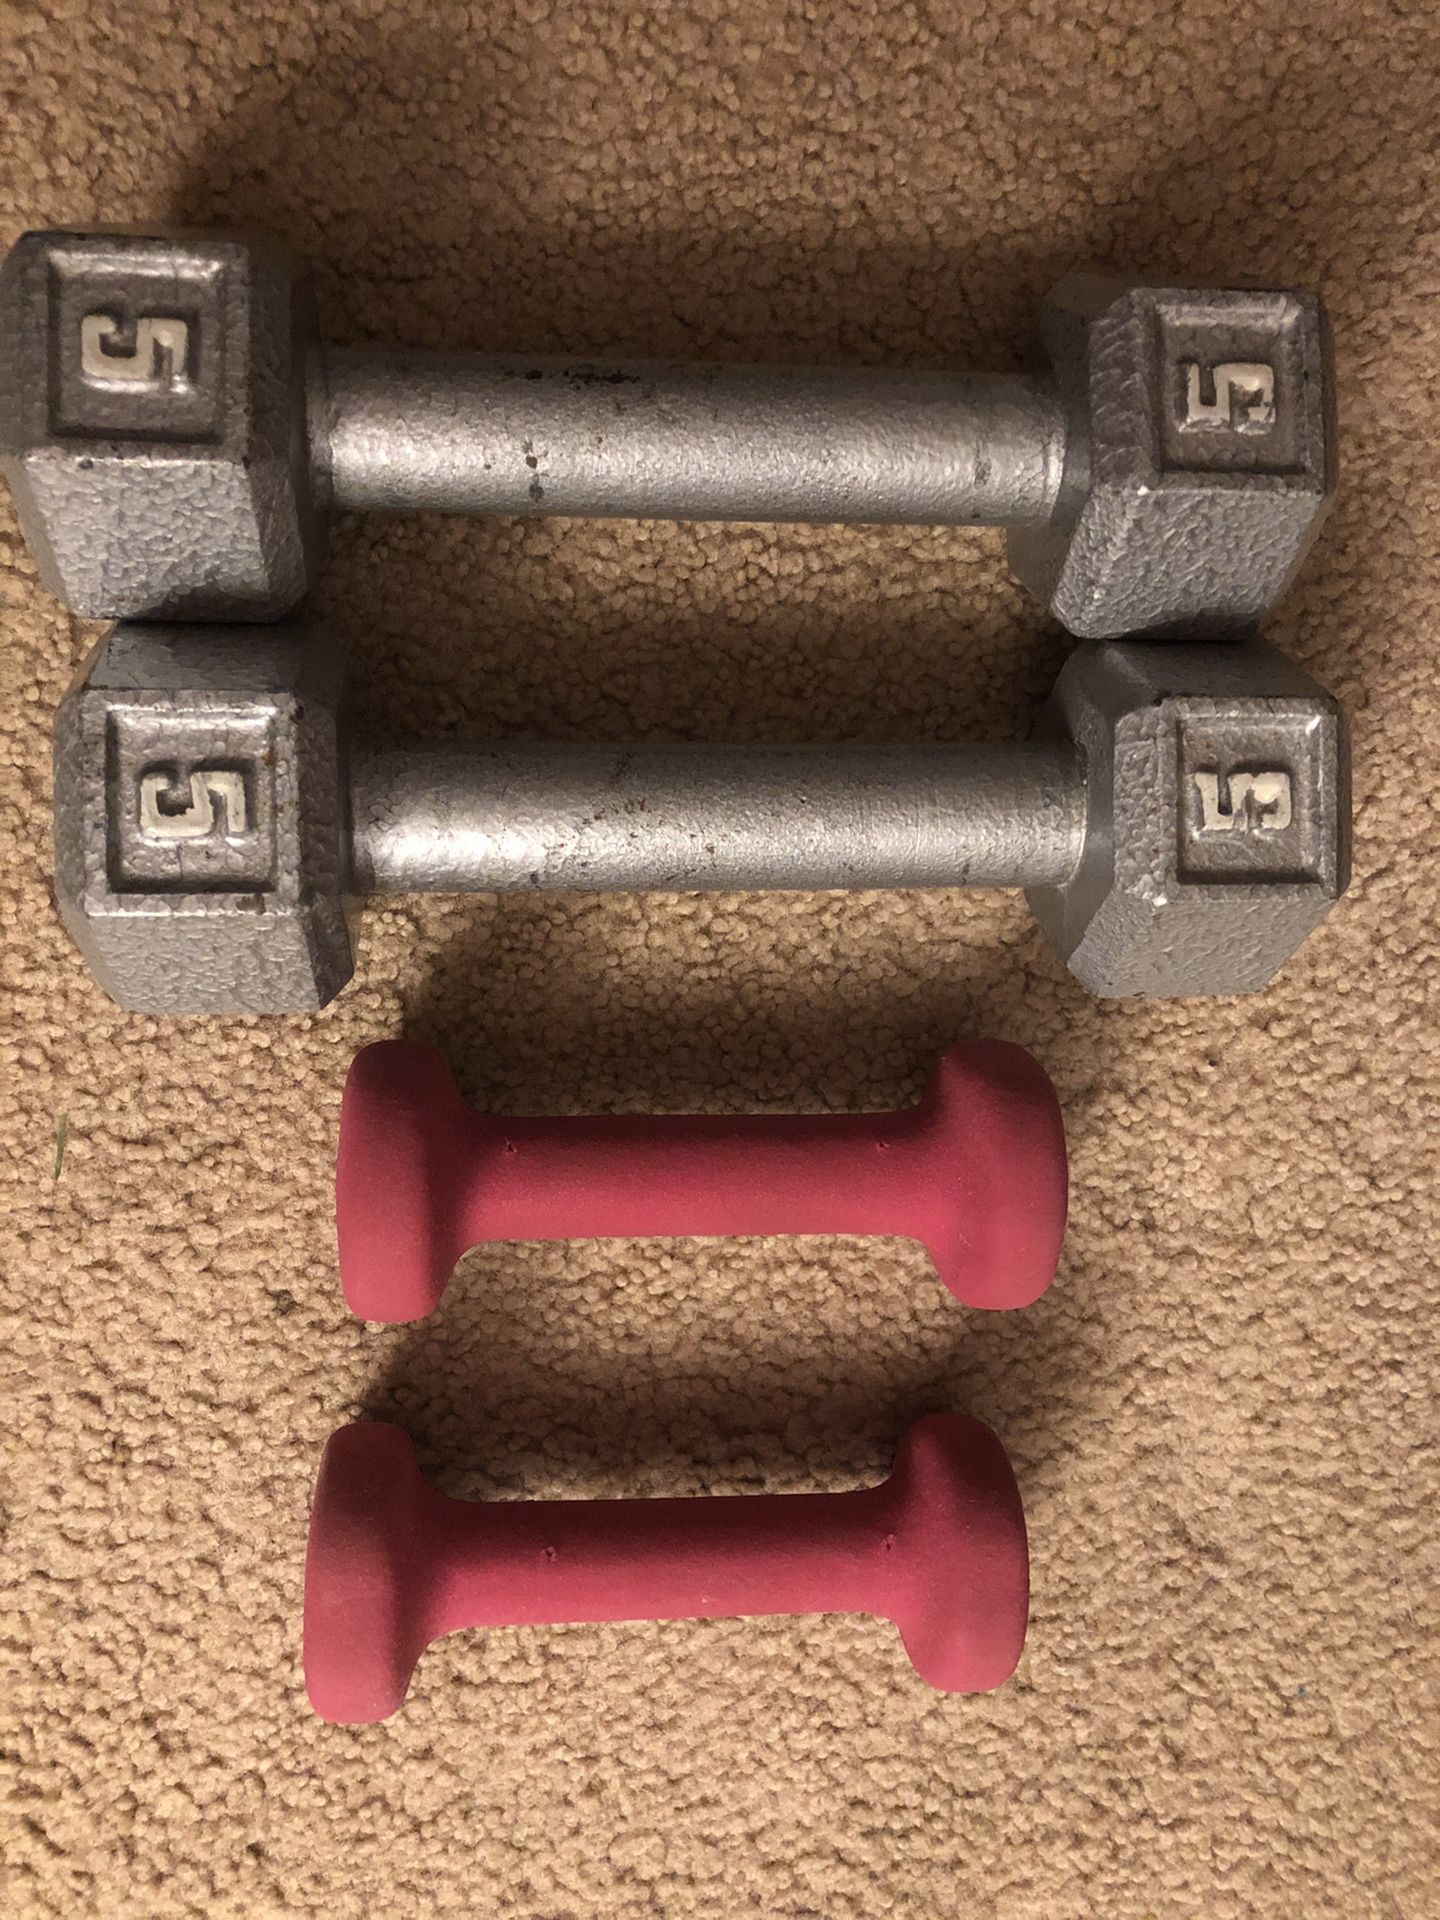 Two Pairs Of Dumbbells Two 5 Pound & Two 1 Pound Exercise Fitness Workout Equipment Weights Set